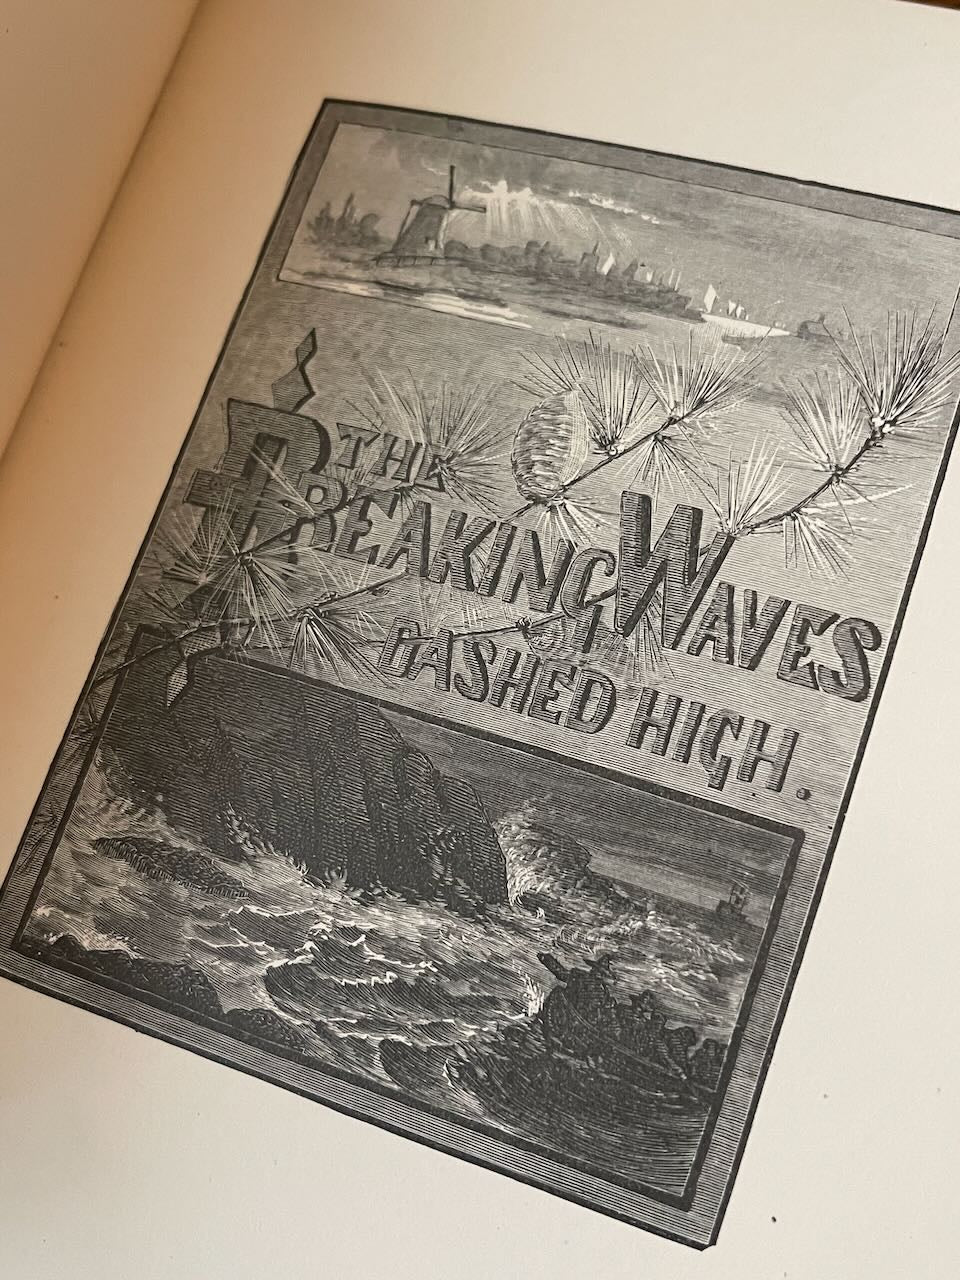 The Breaking Waves Dashed High / 1883 - Precious Cache